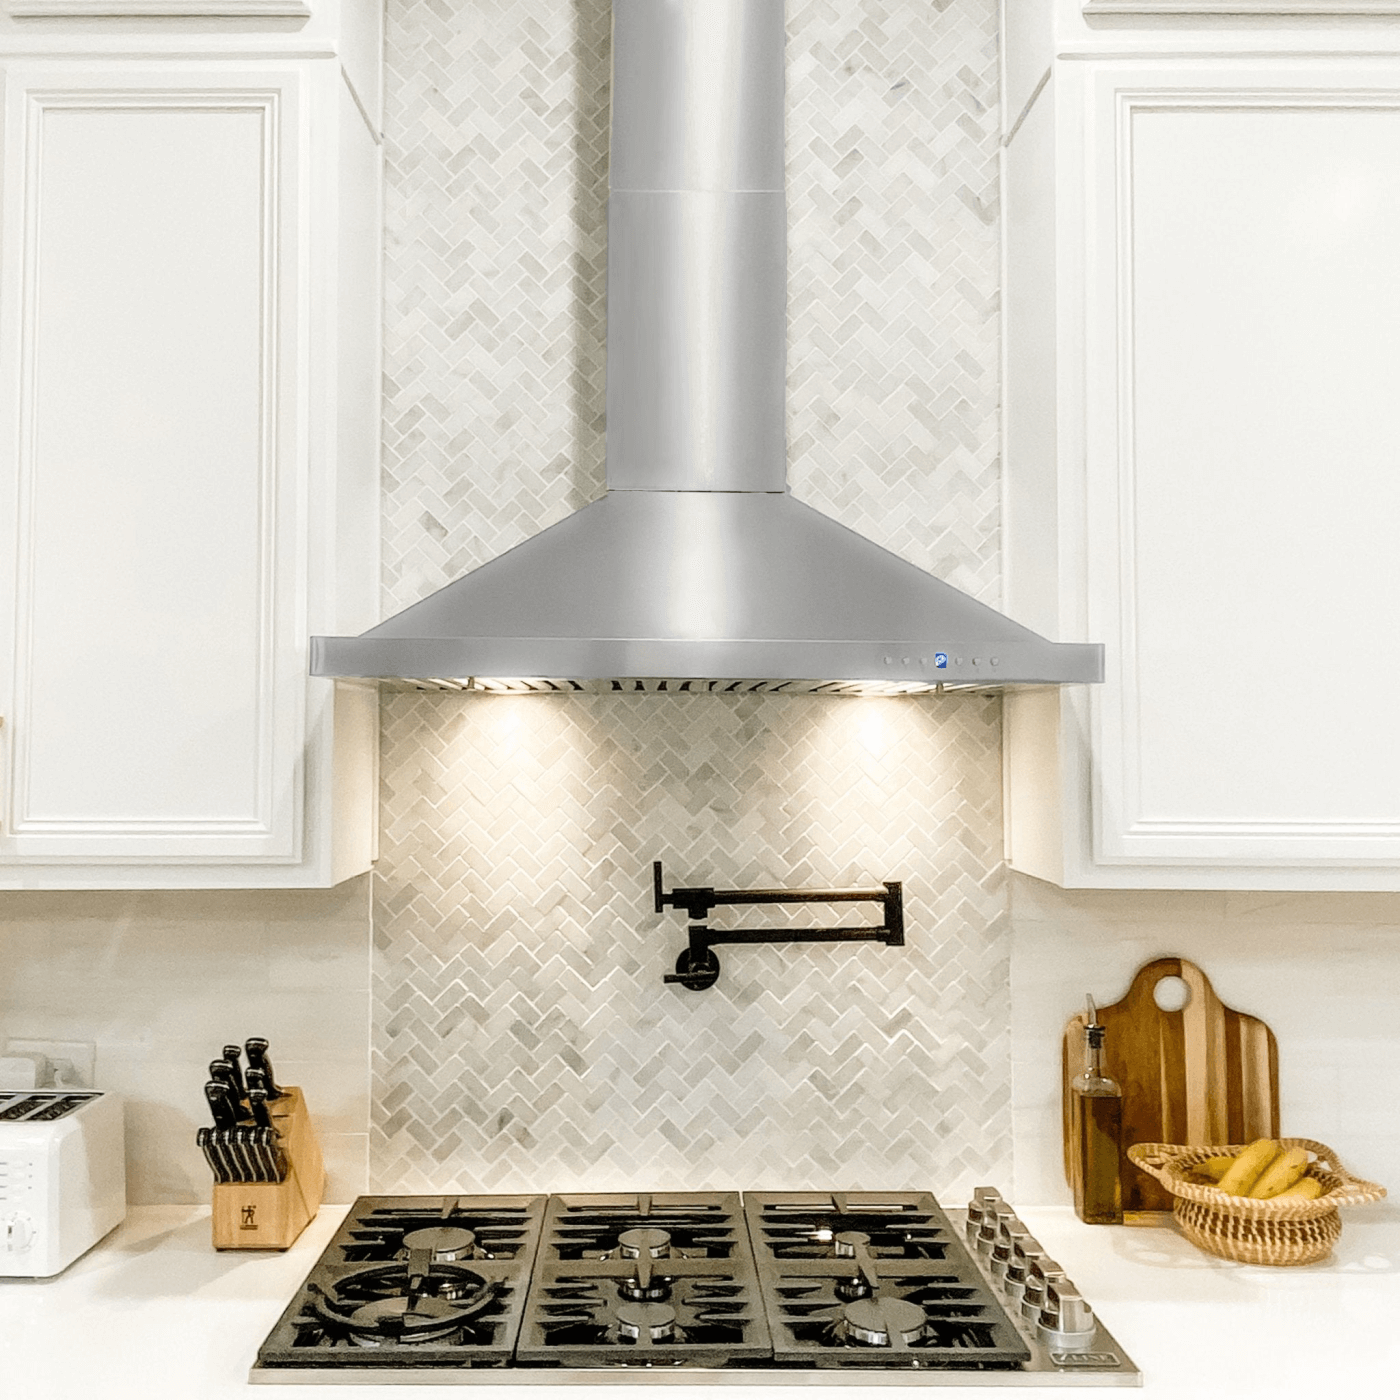 ZLINE Convertible Vent Wall Mount Range Hood in Stainless Steel (KB) - lifestyle